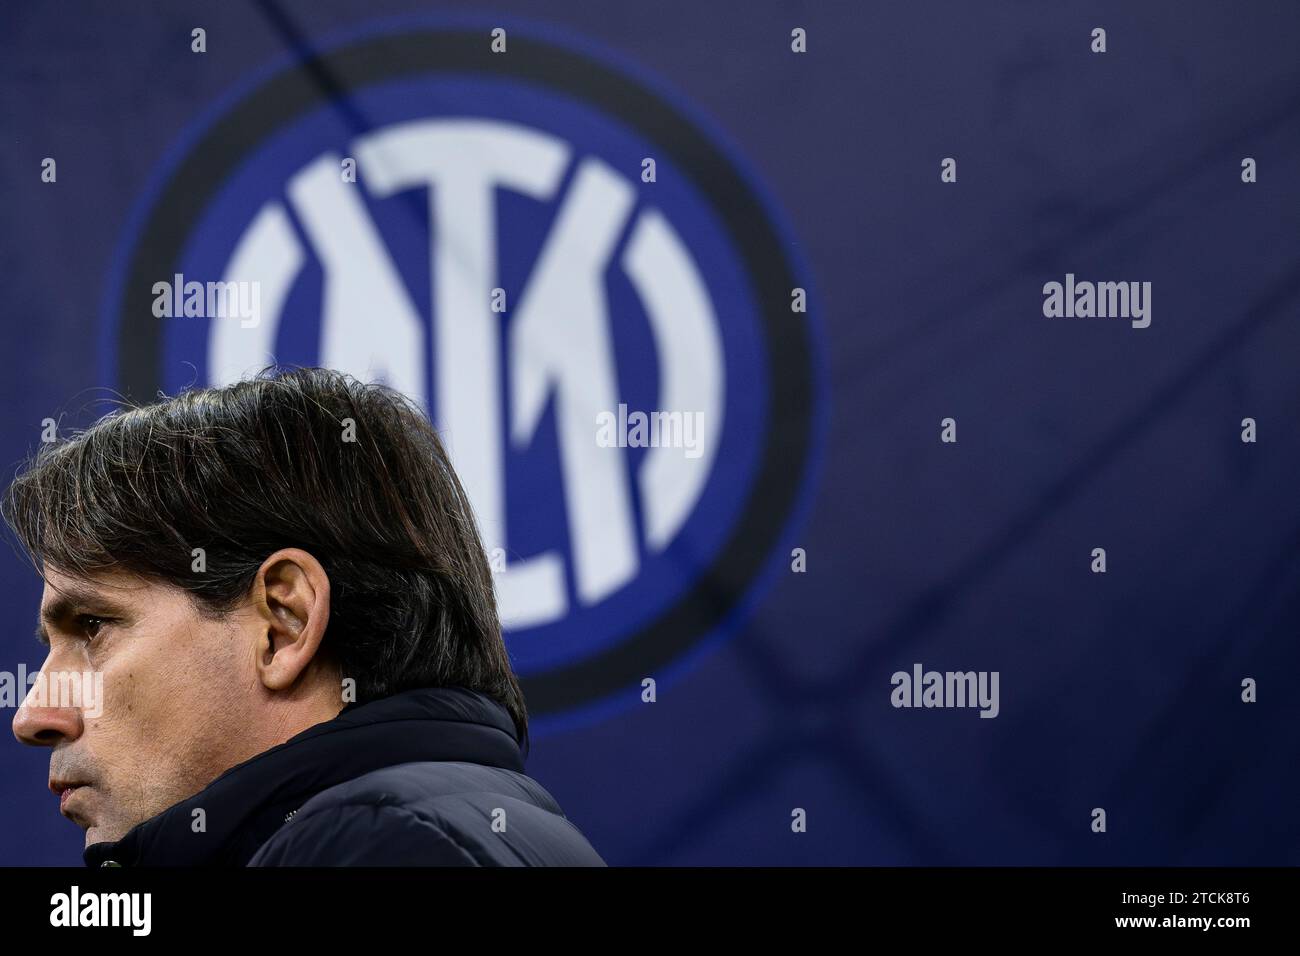 Milan, Italy. 12 December 2023. Simone Inzaghi, head coach of FC Internazionale, looks on prior to the UEFA Champions League football match between FC Internazionale and Real Sociedad. Credit: Nicolò Campo/Alamy Live News Stock Photo